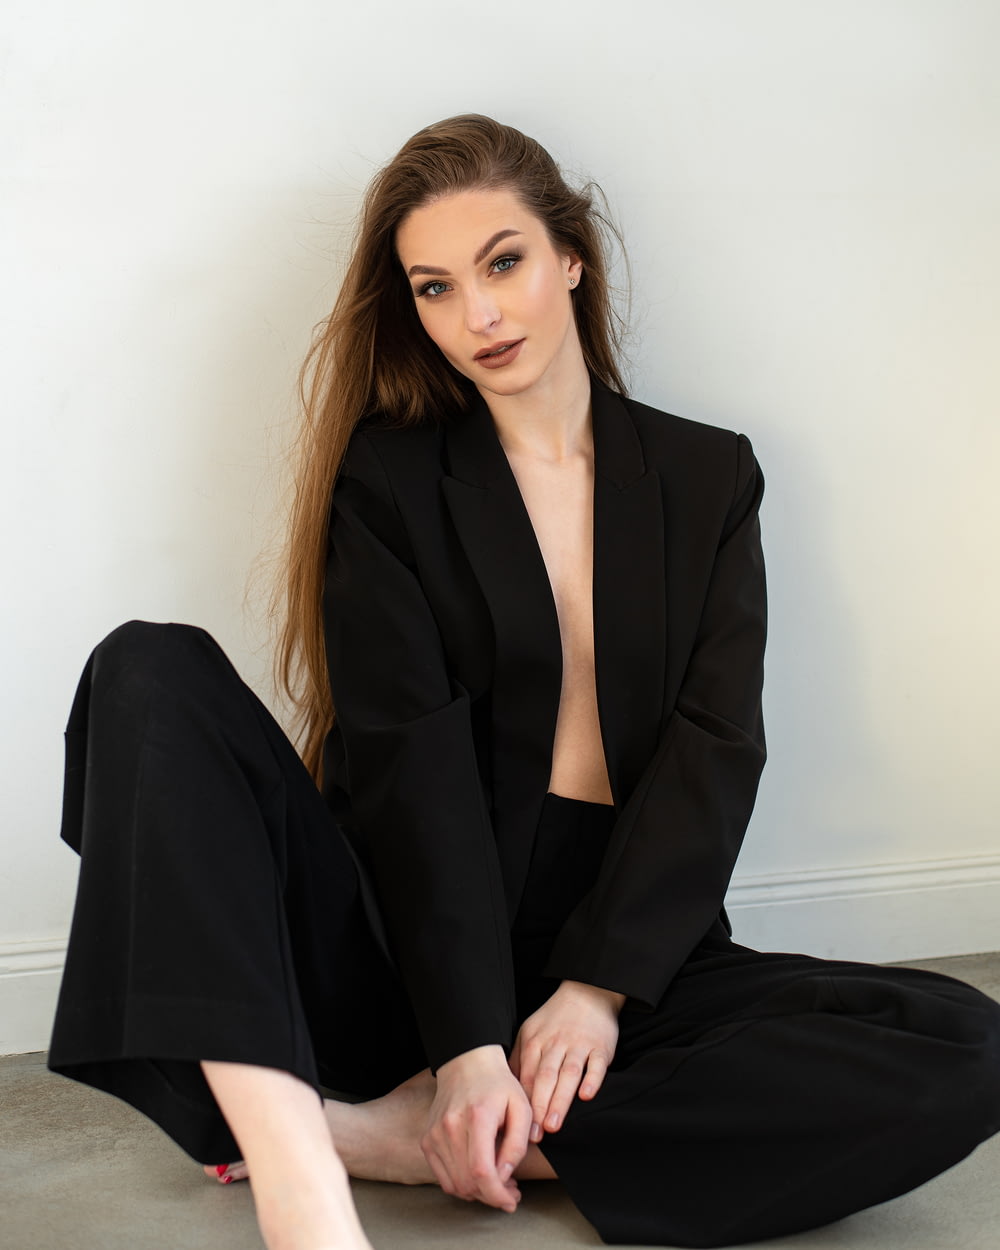 a woman in a black suit sitting on the floor